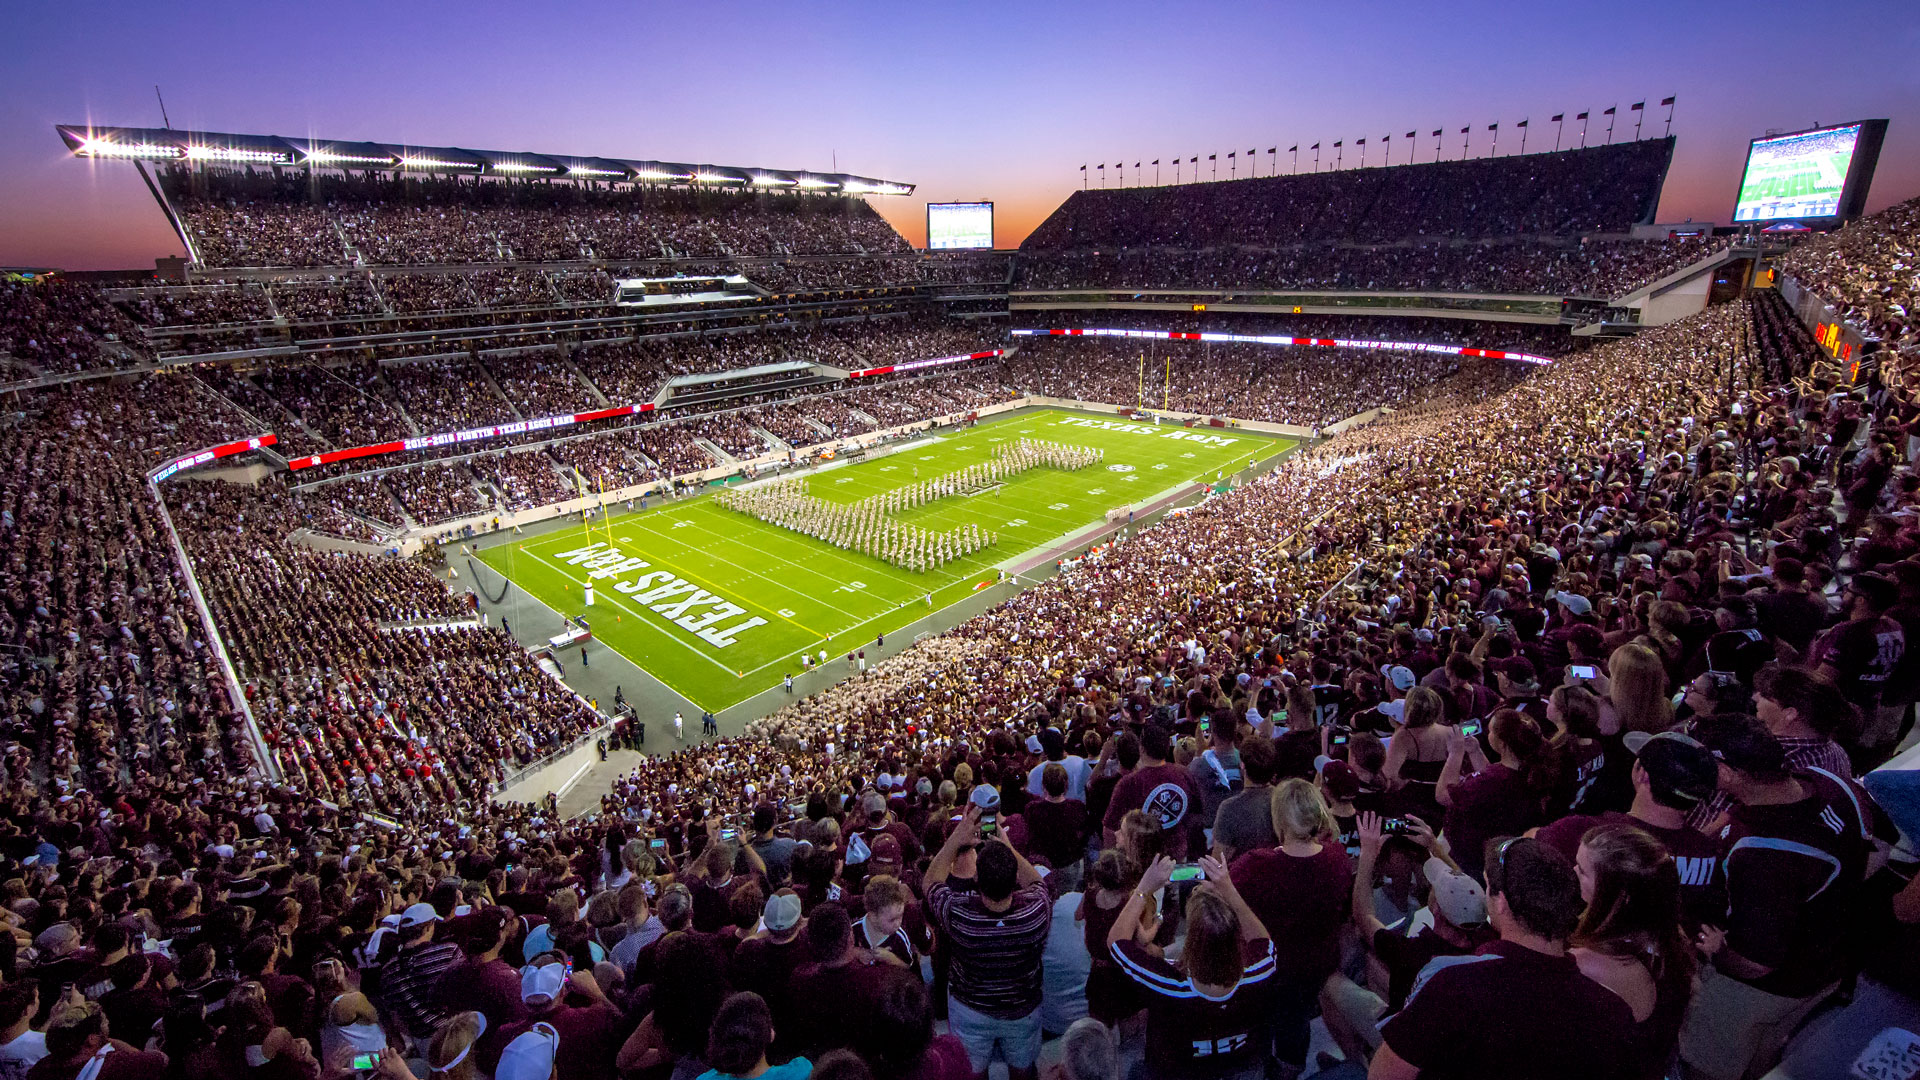 12 Features to Watch for on Opening Day at Kyle Field